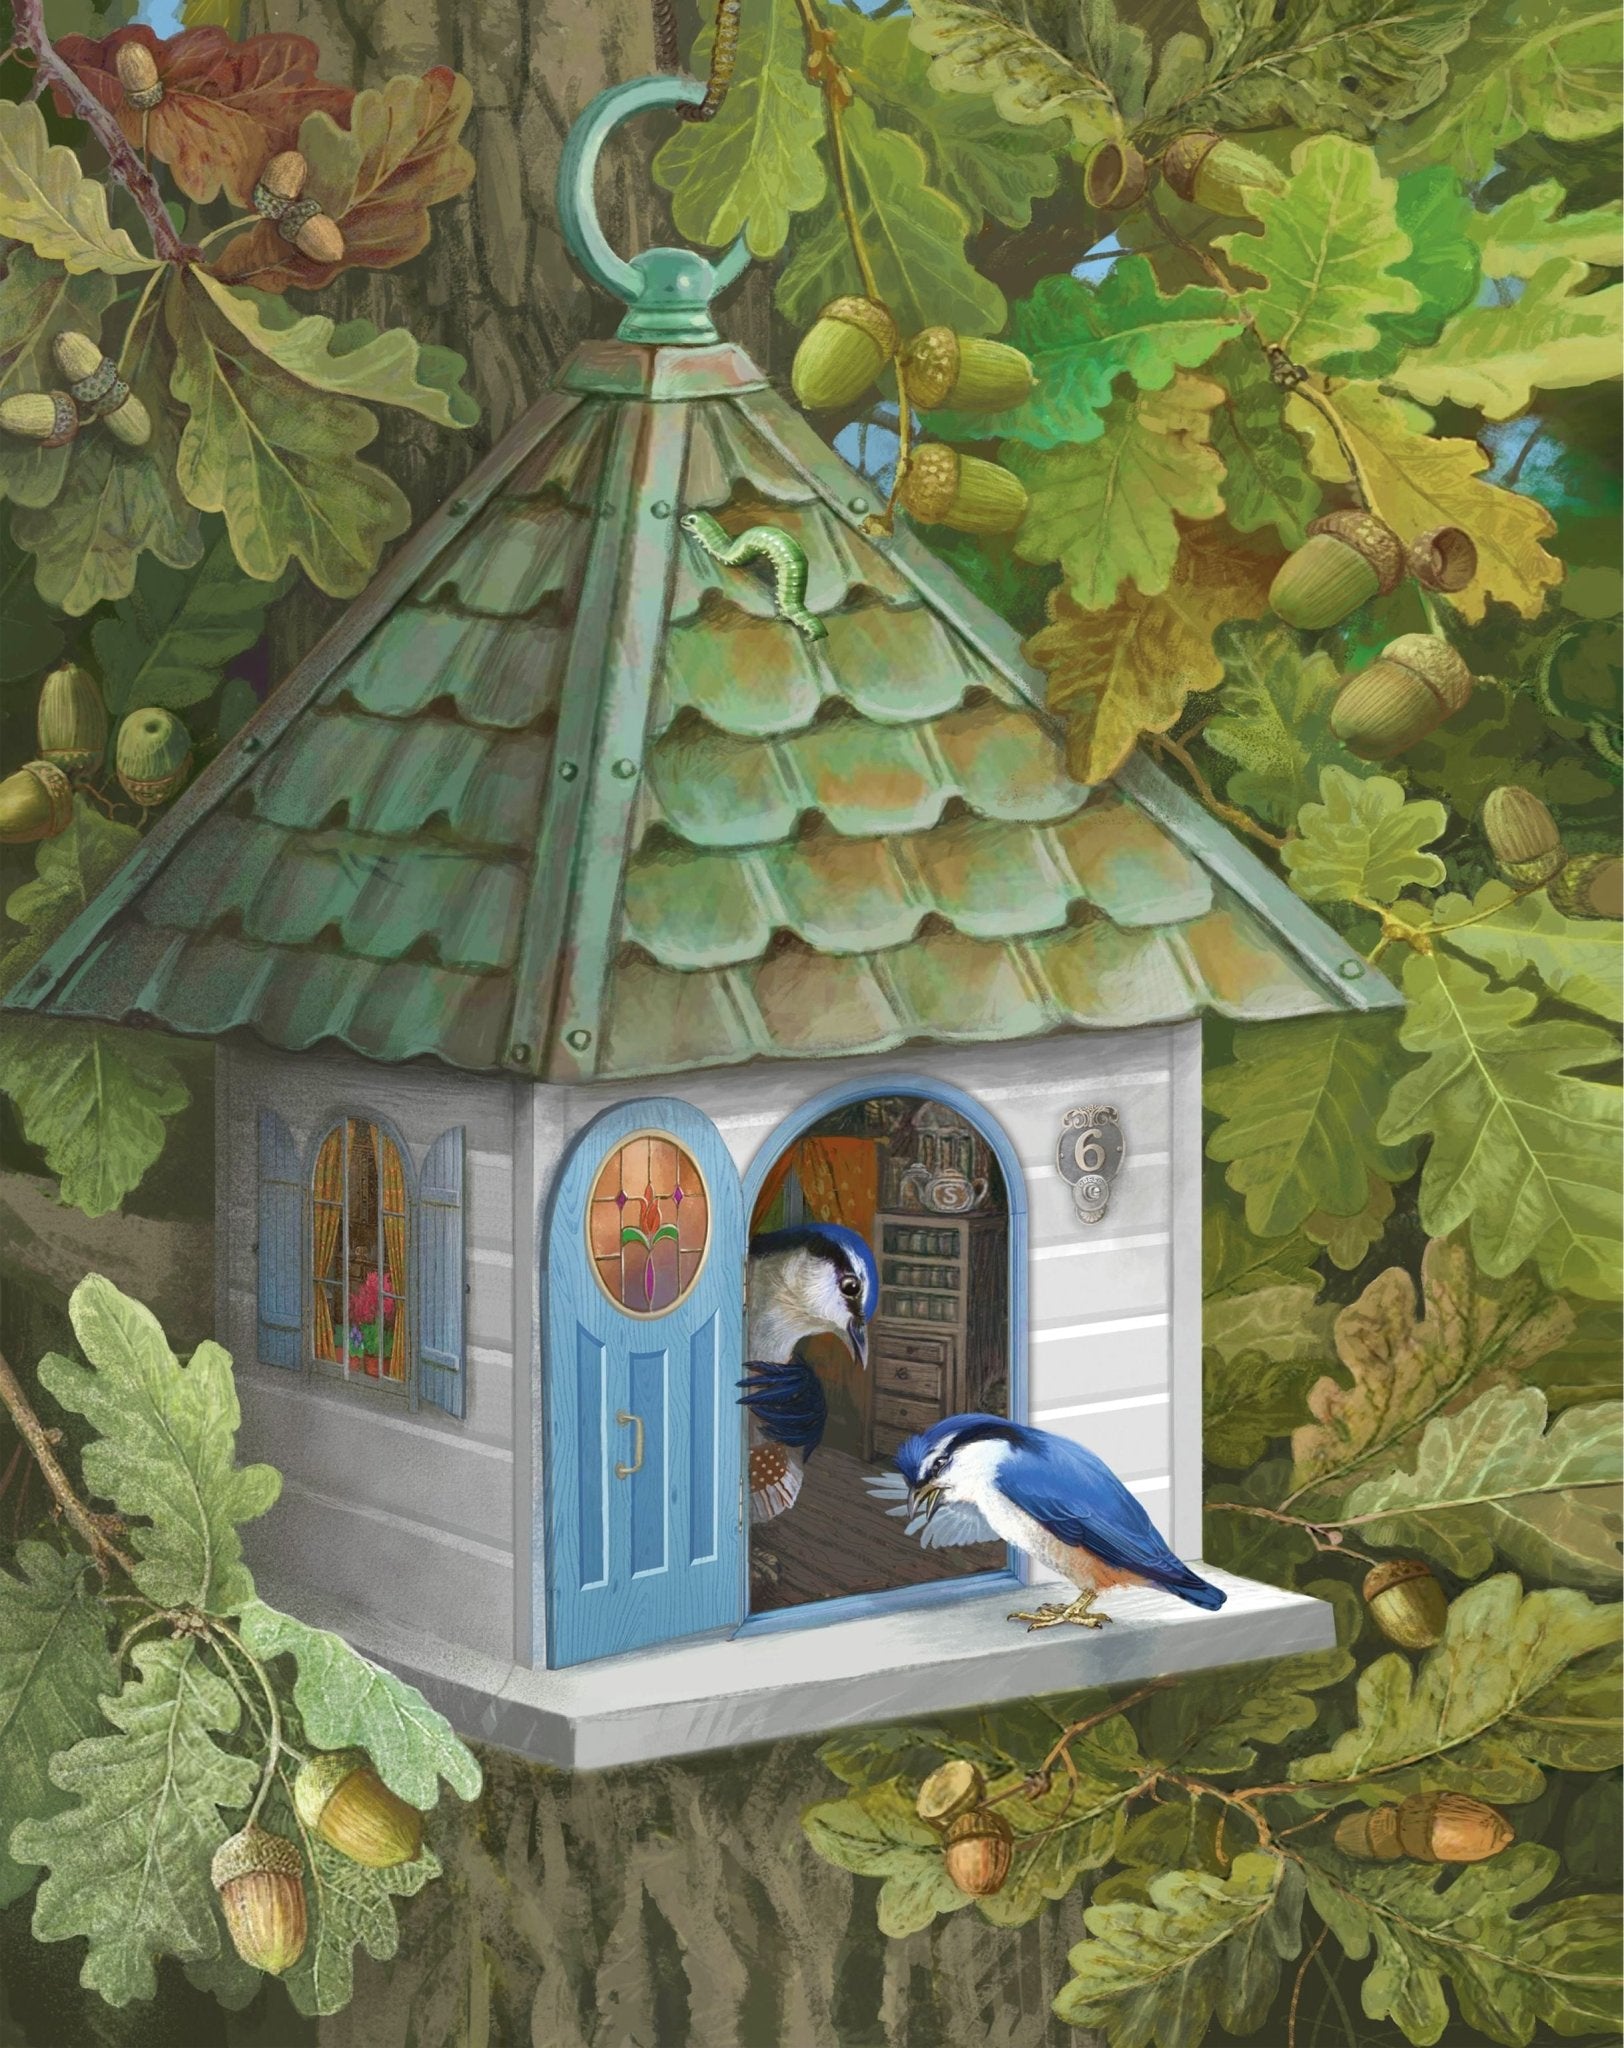 Simon’s Tree House Party Children’s Book by Stephen G. Bowling & Simon’s Bird House - Good Directions